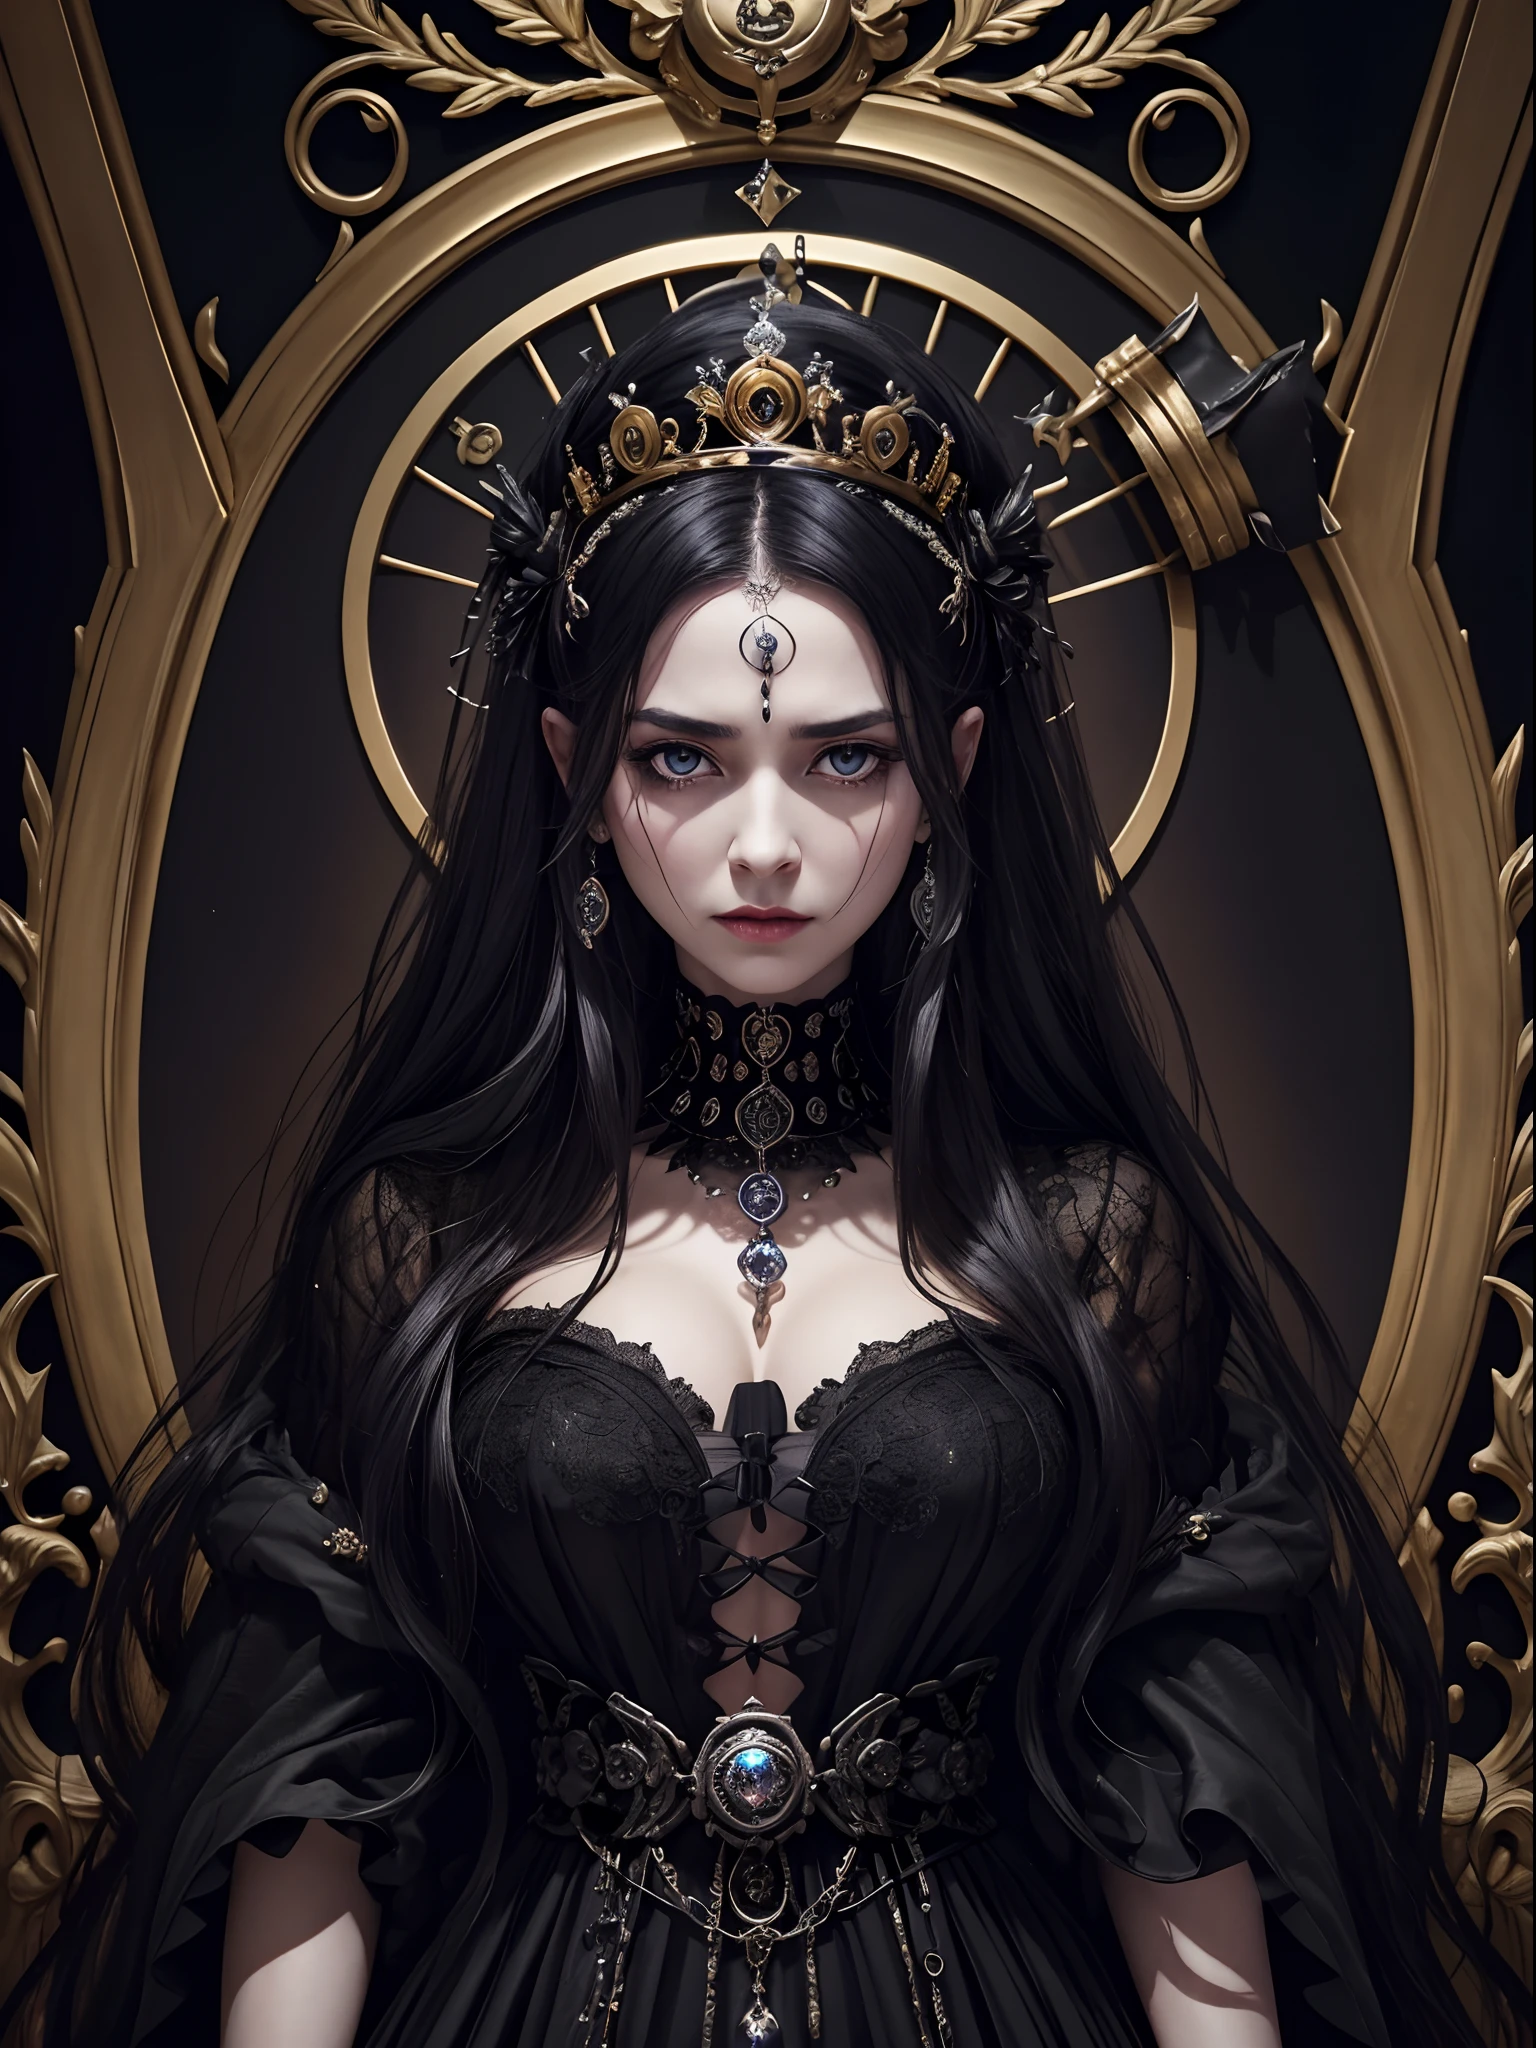 Black and gold tones、Hell、purgatory、Mozart's Requiem、Mystical、horor、gotik、darkness、karo、badas、epidemic、ruler、Pitch Black Darkness、hopelessness、lamentation、oppression、nothingness、intense cold、Black Ghost、Adult female mature woman in her 40s、Queen of the Dead、Persephone、lilith、hades、awe、immortal、draconian、Awe-inspiring Hall々、Proud、noble、dignity、solemnity、Bewitching、Chaste and lascivious cohabitation、hatred、obsession、jewely、ruthless、greed、3-point live method、Oil Painting、Best Quality、hight resolution、foco nítido、Portrait of Queen D，Highly detailed footage of the Queen of the Dead，Stunning portrait of the Queen of the Exparted，Portrait of the Queen of the Dead，Full body close-up of the Queen of the Dead